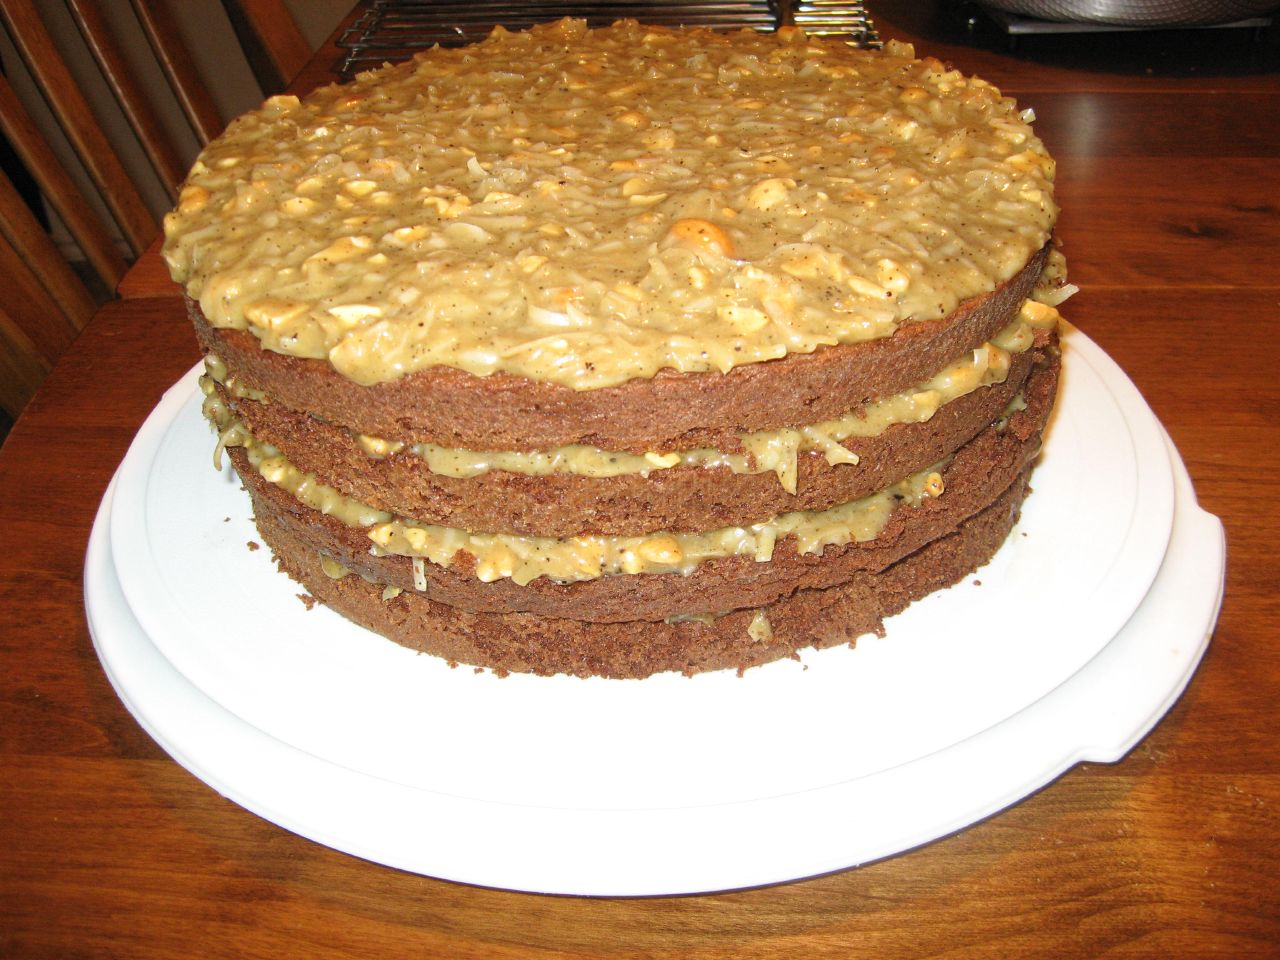 a stack of layered chocolate cake with nuts and caramel